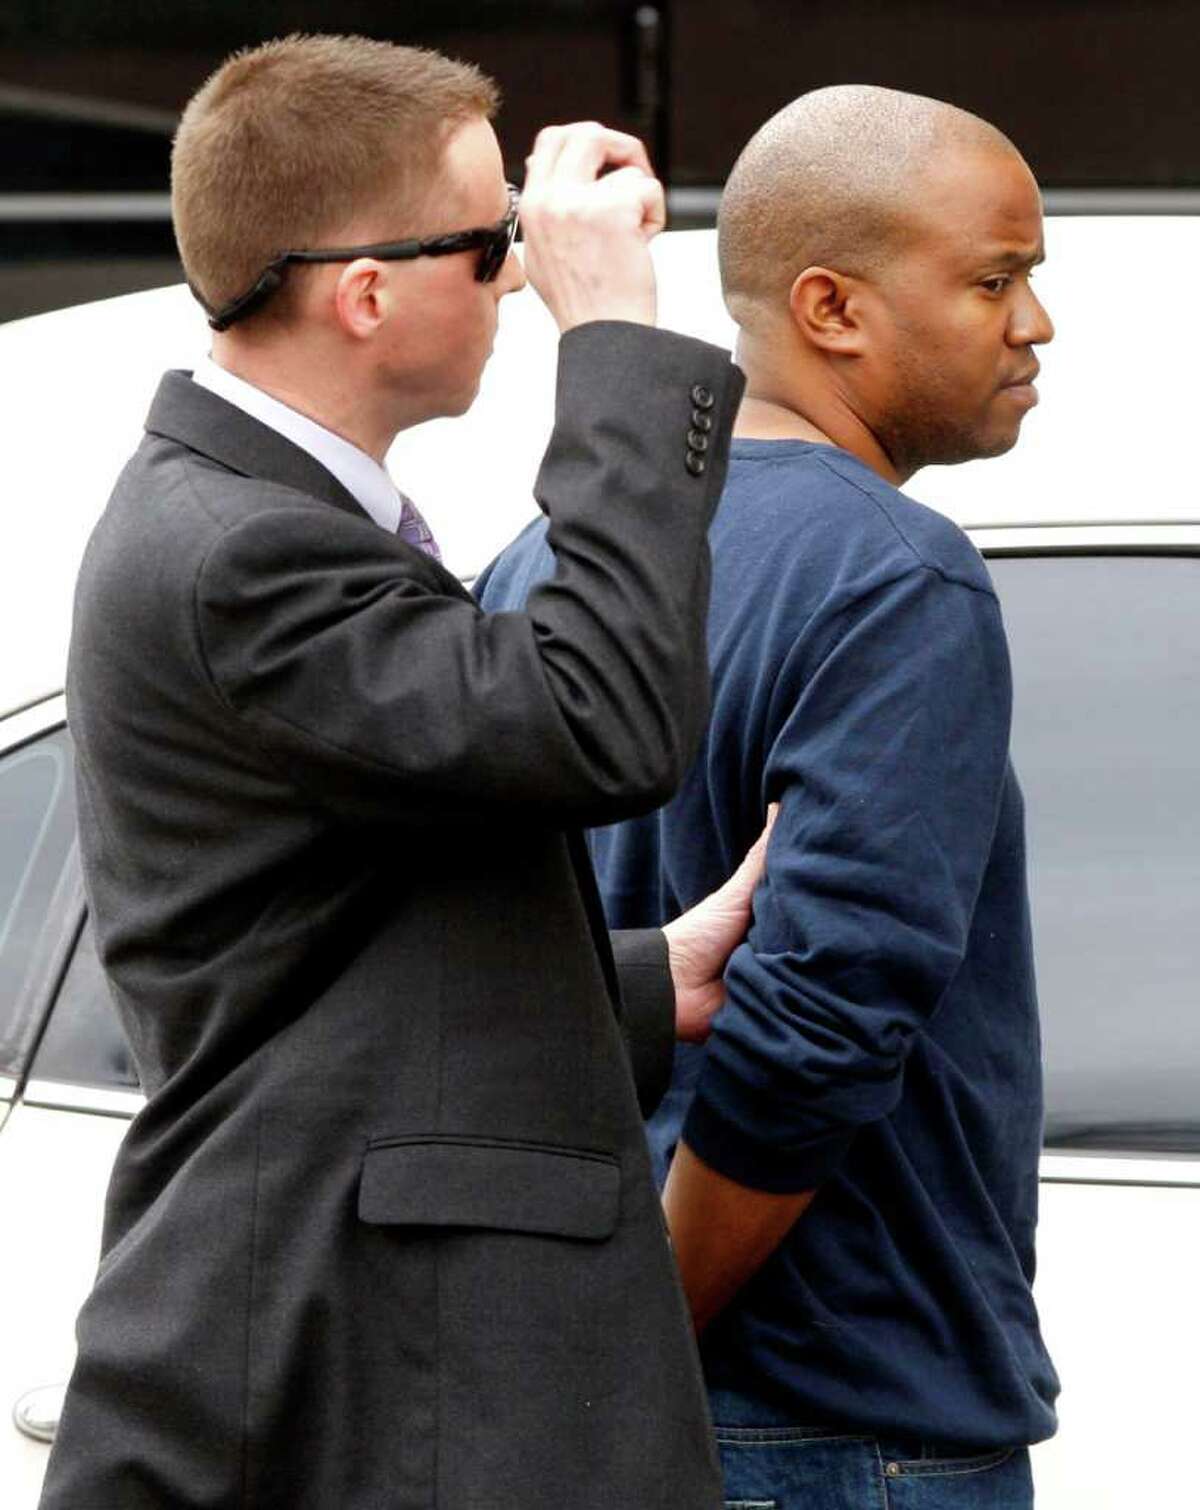 FBI agents take Gemase Lee Simmons (right) to federal court in San Antonio on Jan. 31, 2012, after he was arrested on federal child-porn related charges. Simmons was featured in a news segment on Dateline alleging he scammed several youths into believing they were being filmed for a reality show about modeling.